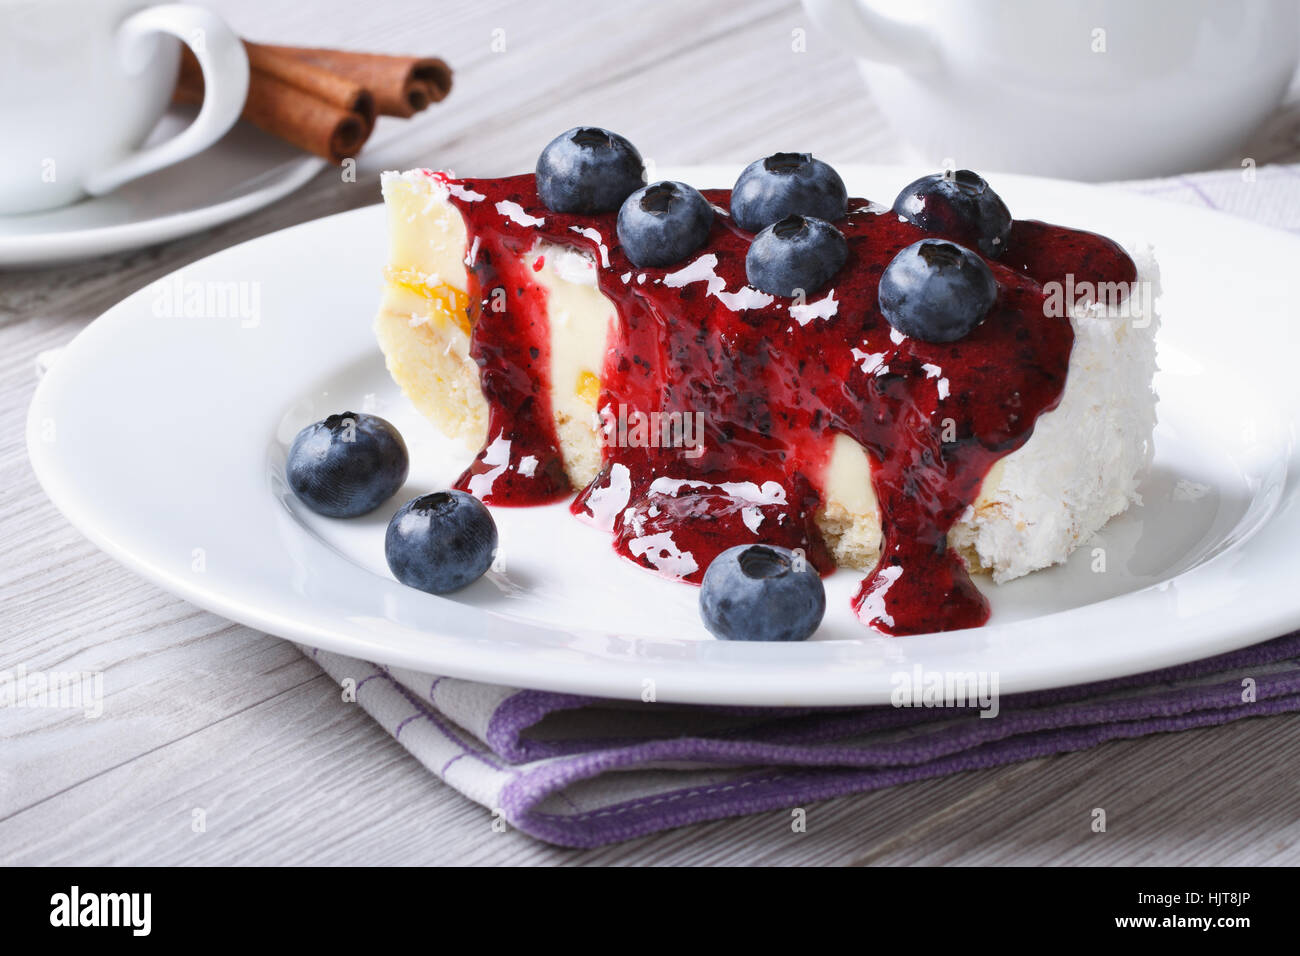 Cake with blueberry, berry sauce on a white plate and coffee on the table horizontal Stock Photo